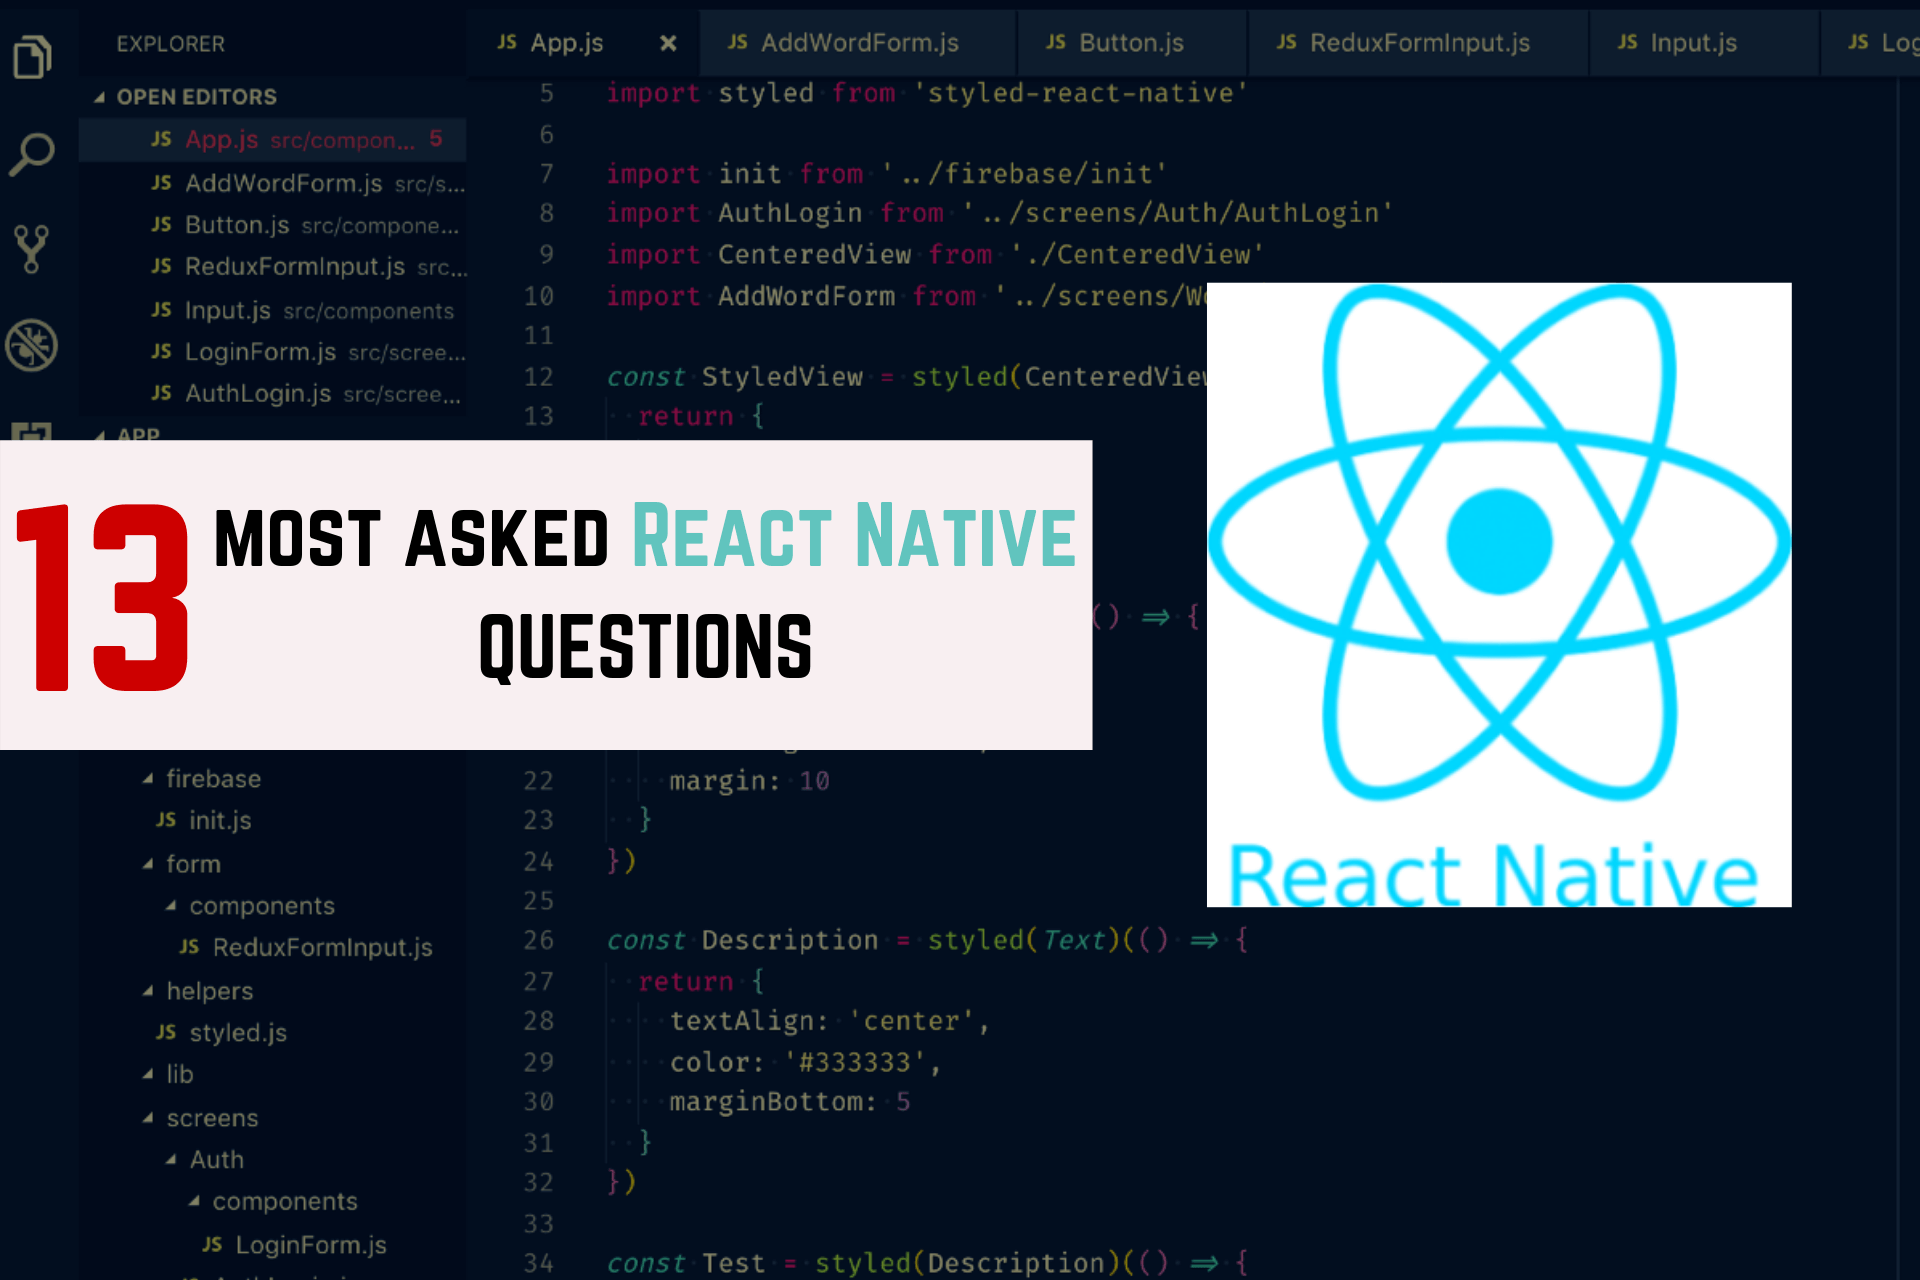 13 Most Asked React Native Questions